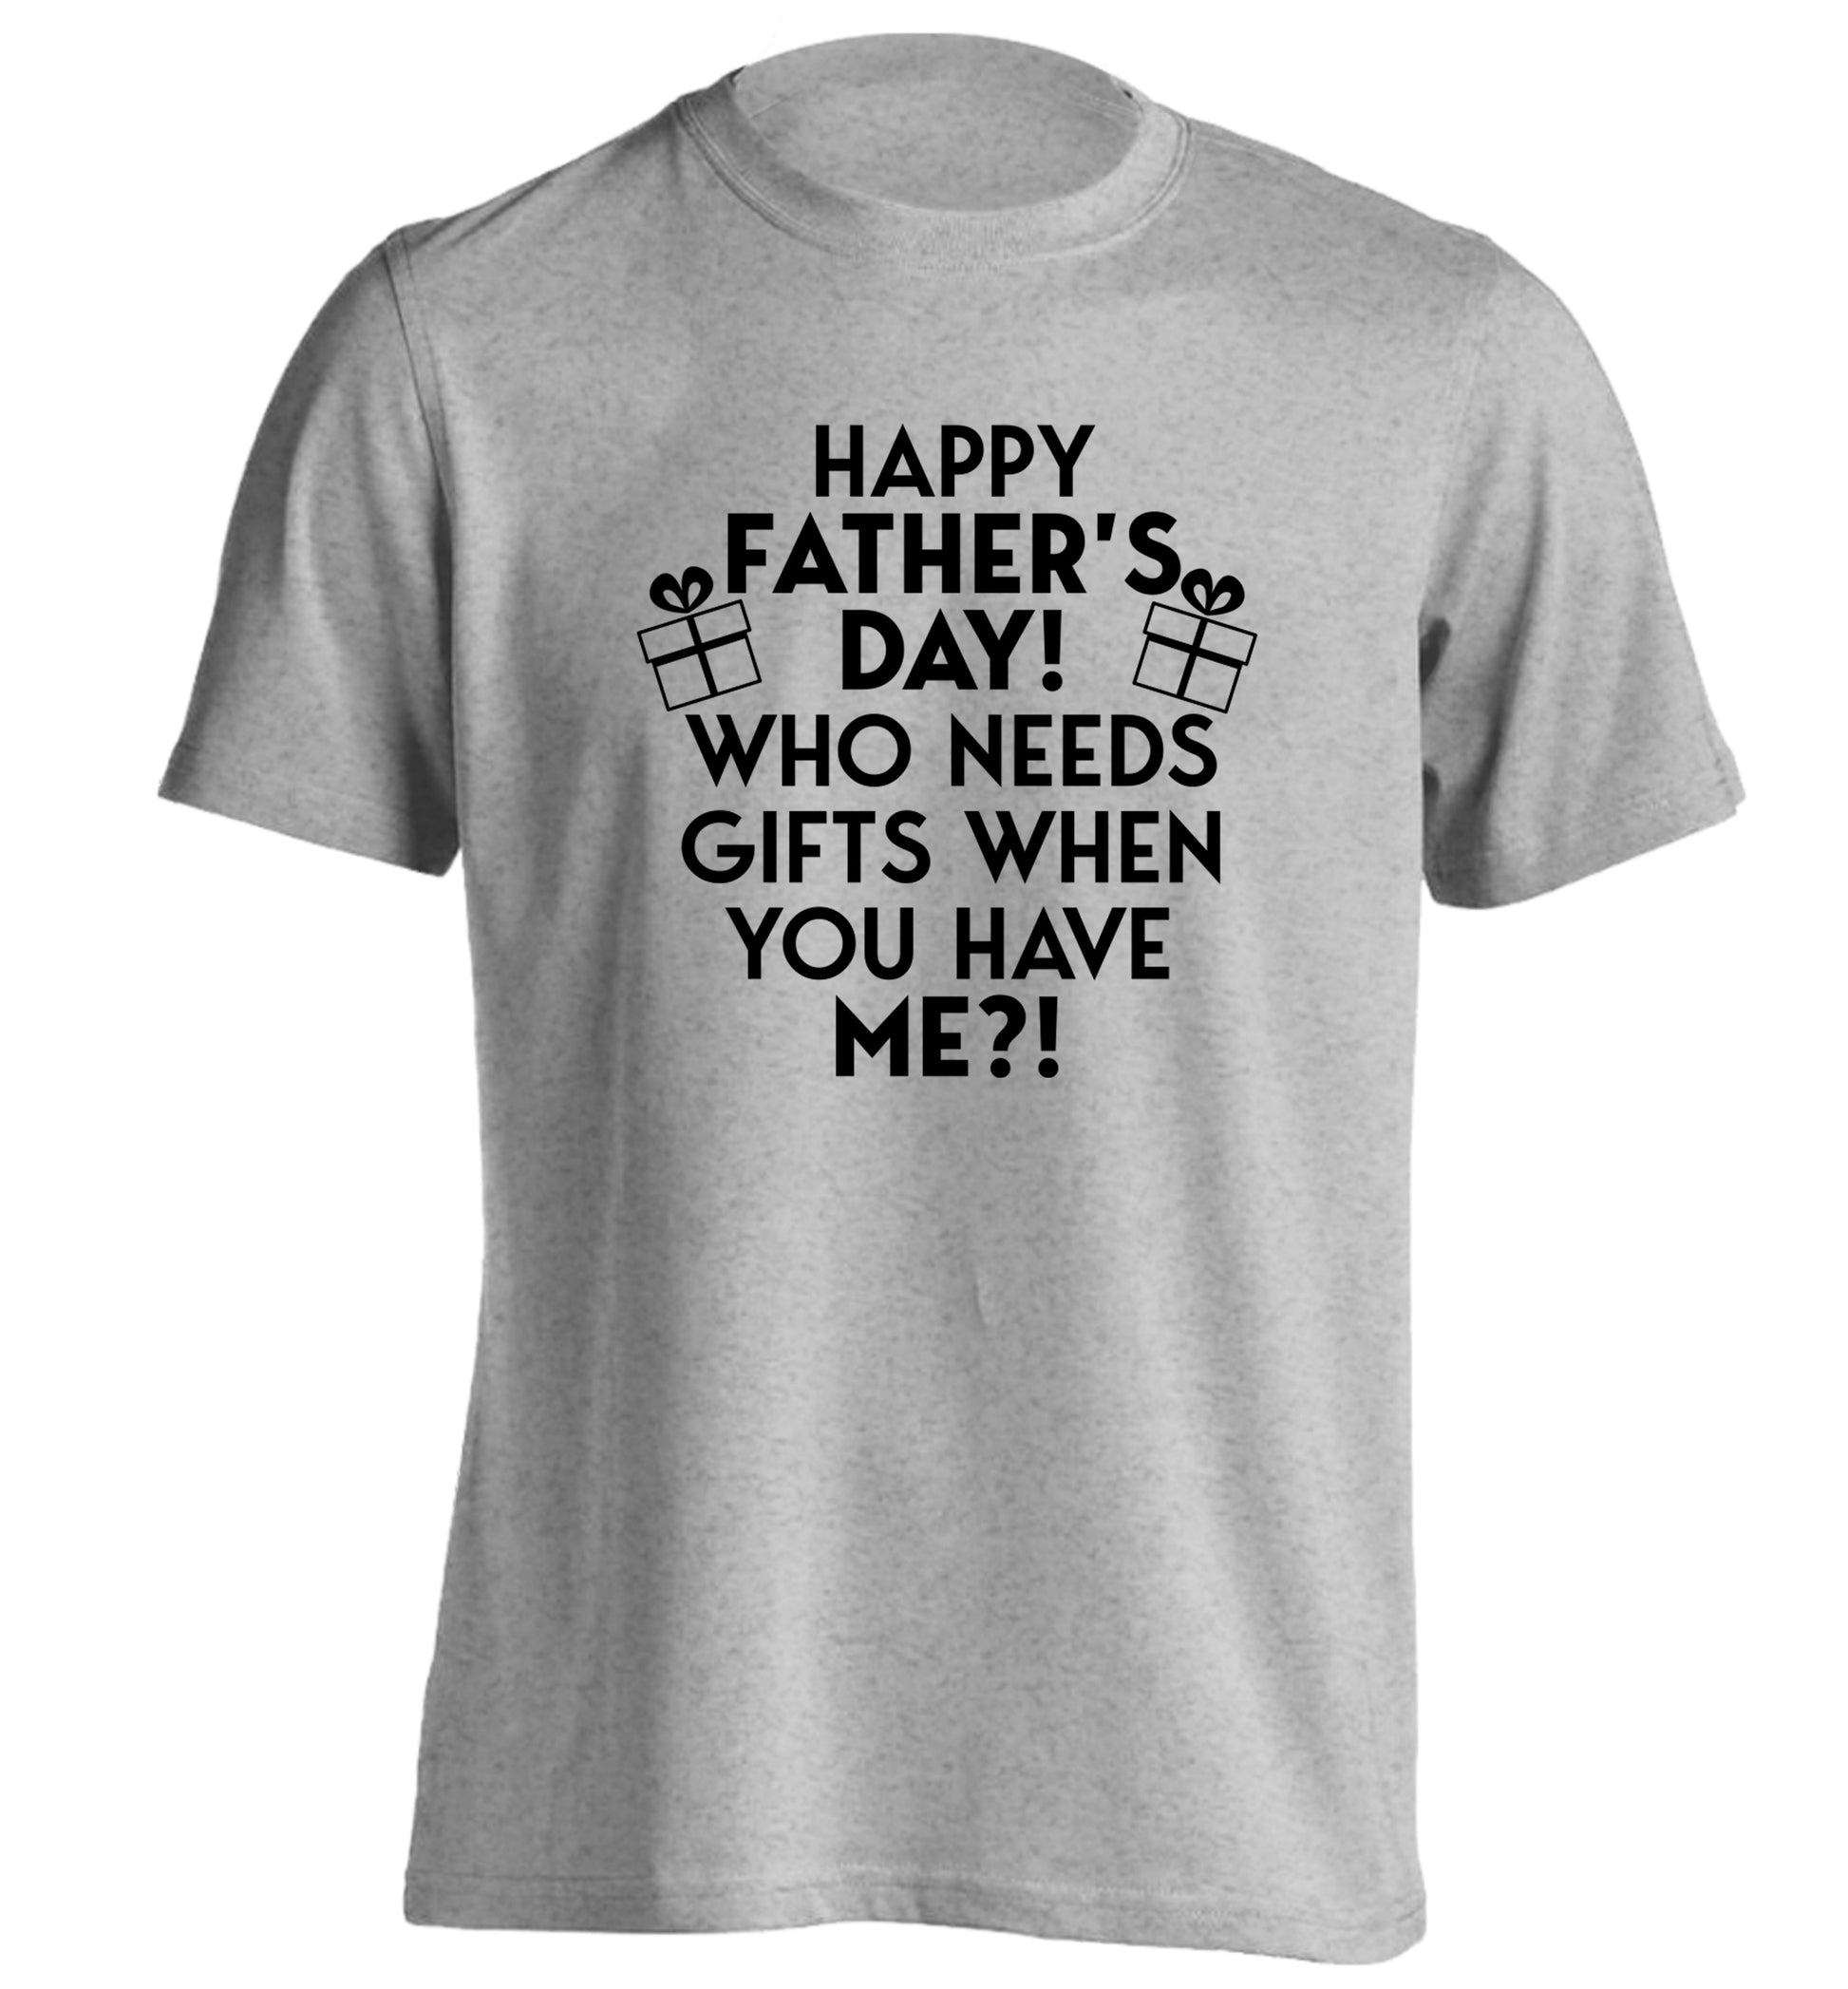 Happy Father's day, who needs a present when you have me adults unisex grey Tshirt 2XL